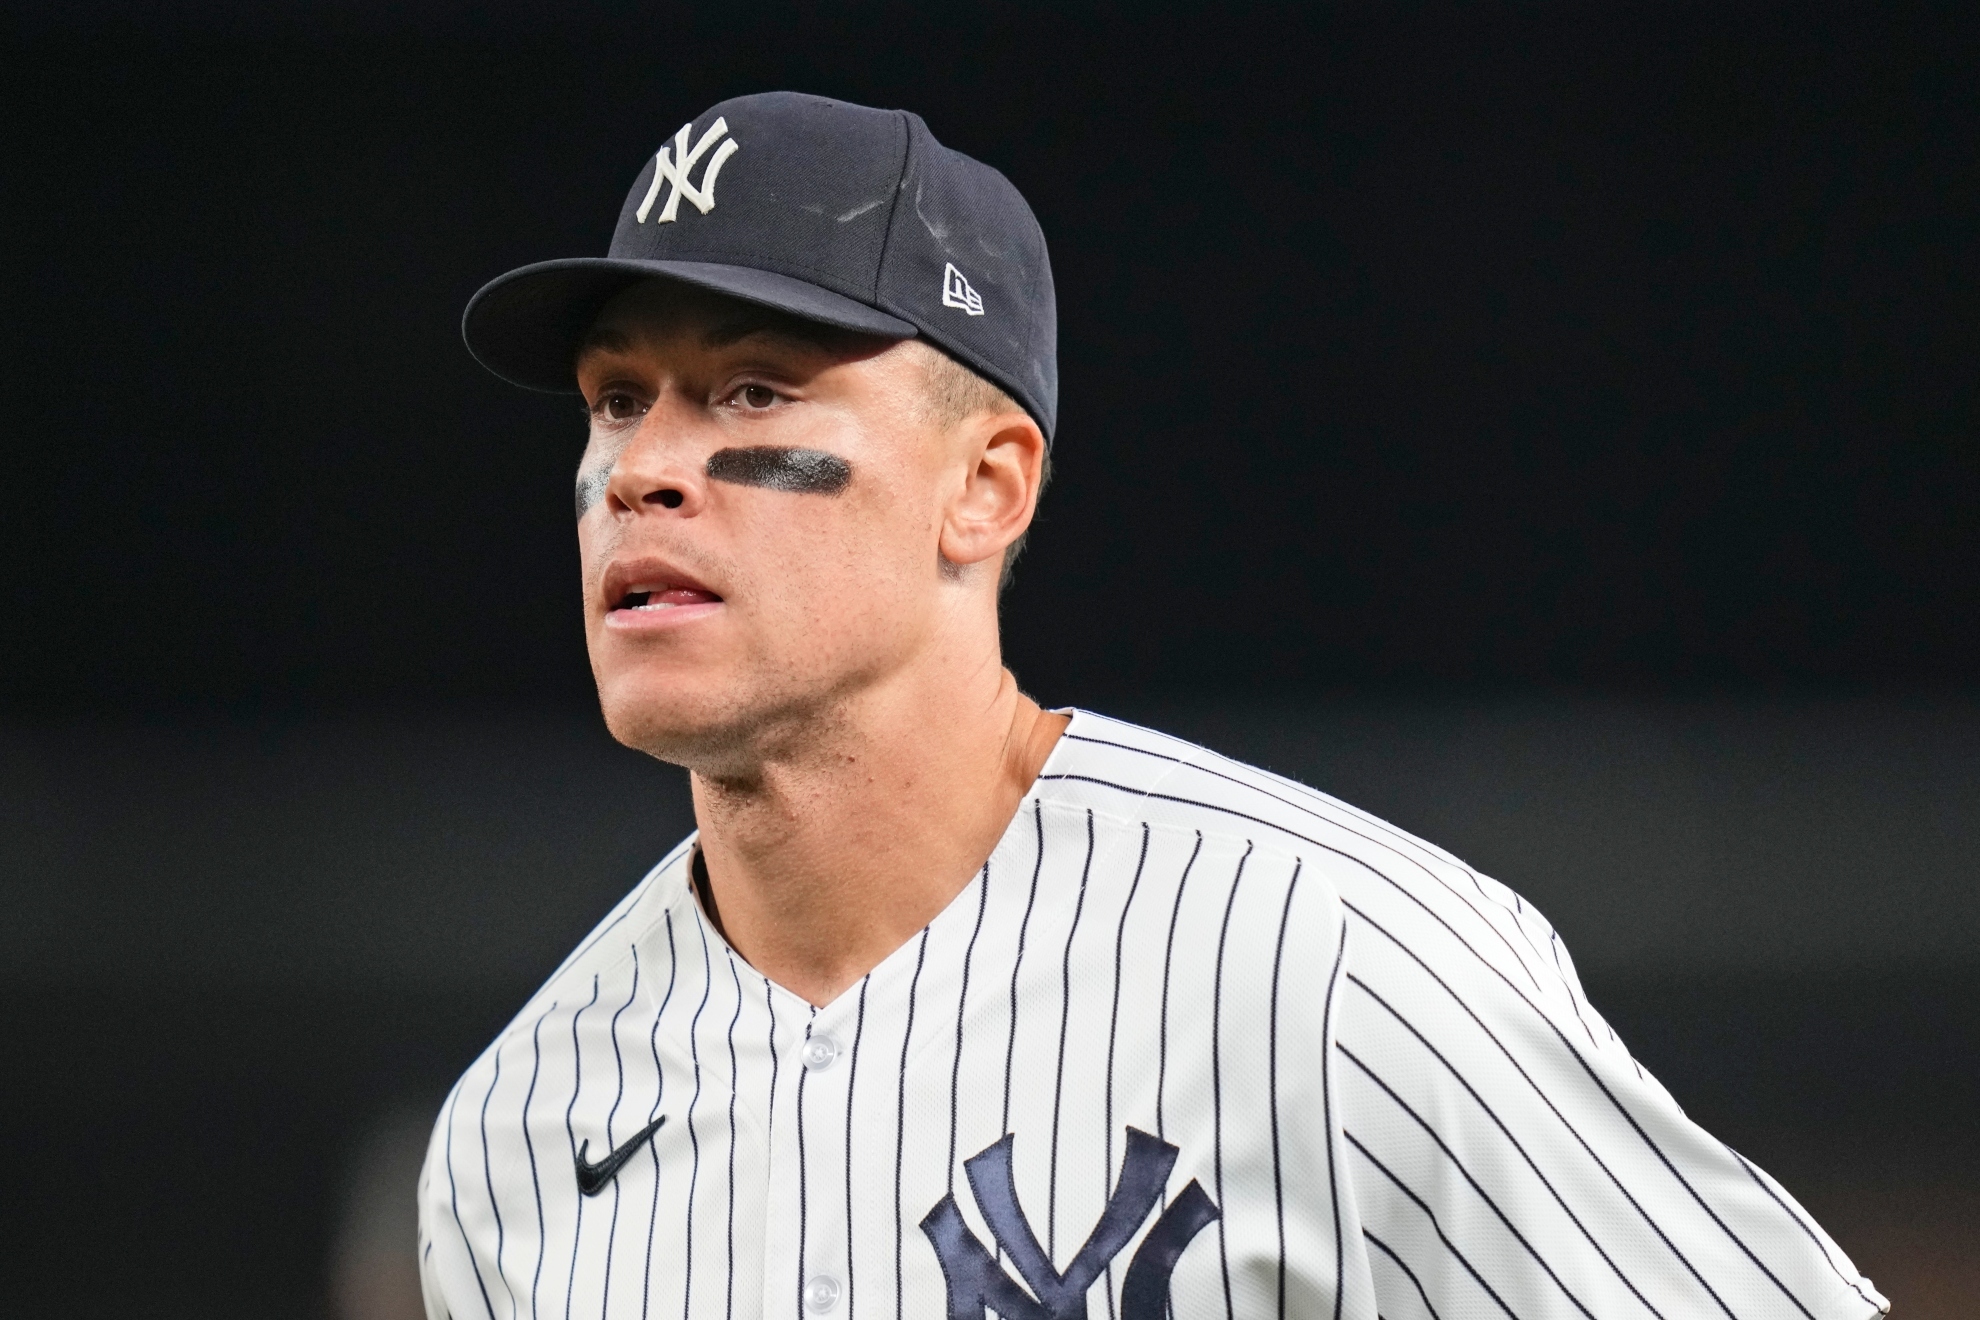 Aaron Judge just signed a nine year deal with the New York Yankees this past offseason.